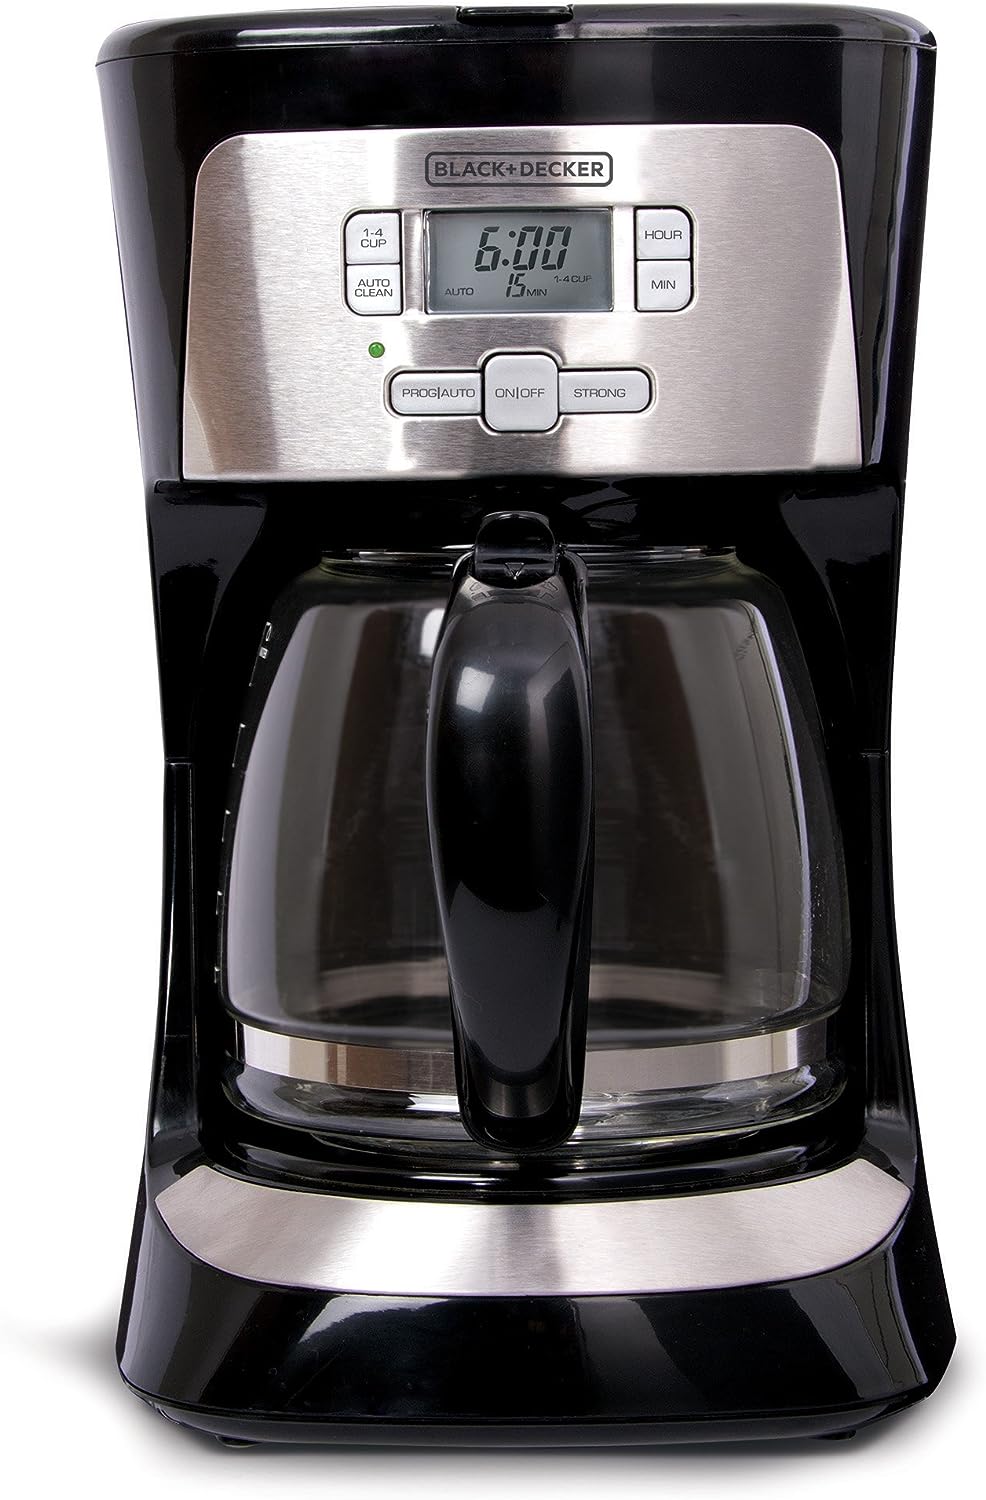 BLACK+DECKER 12-Cup Programmable Coffee Maker Review